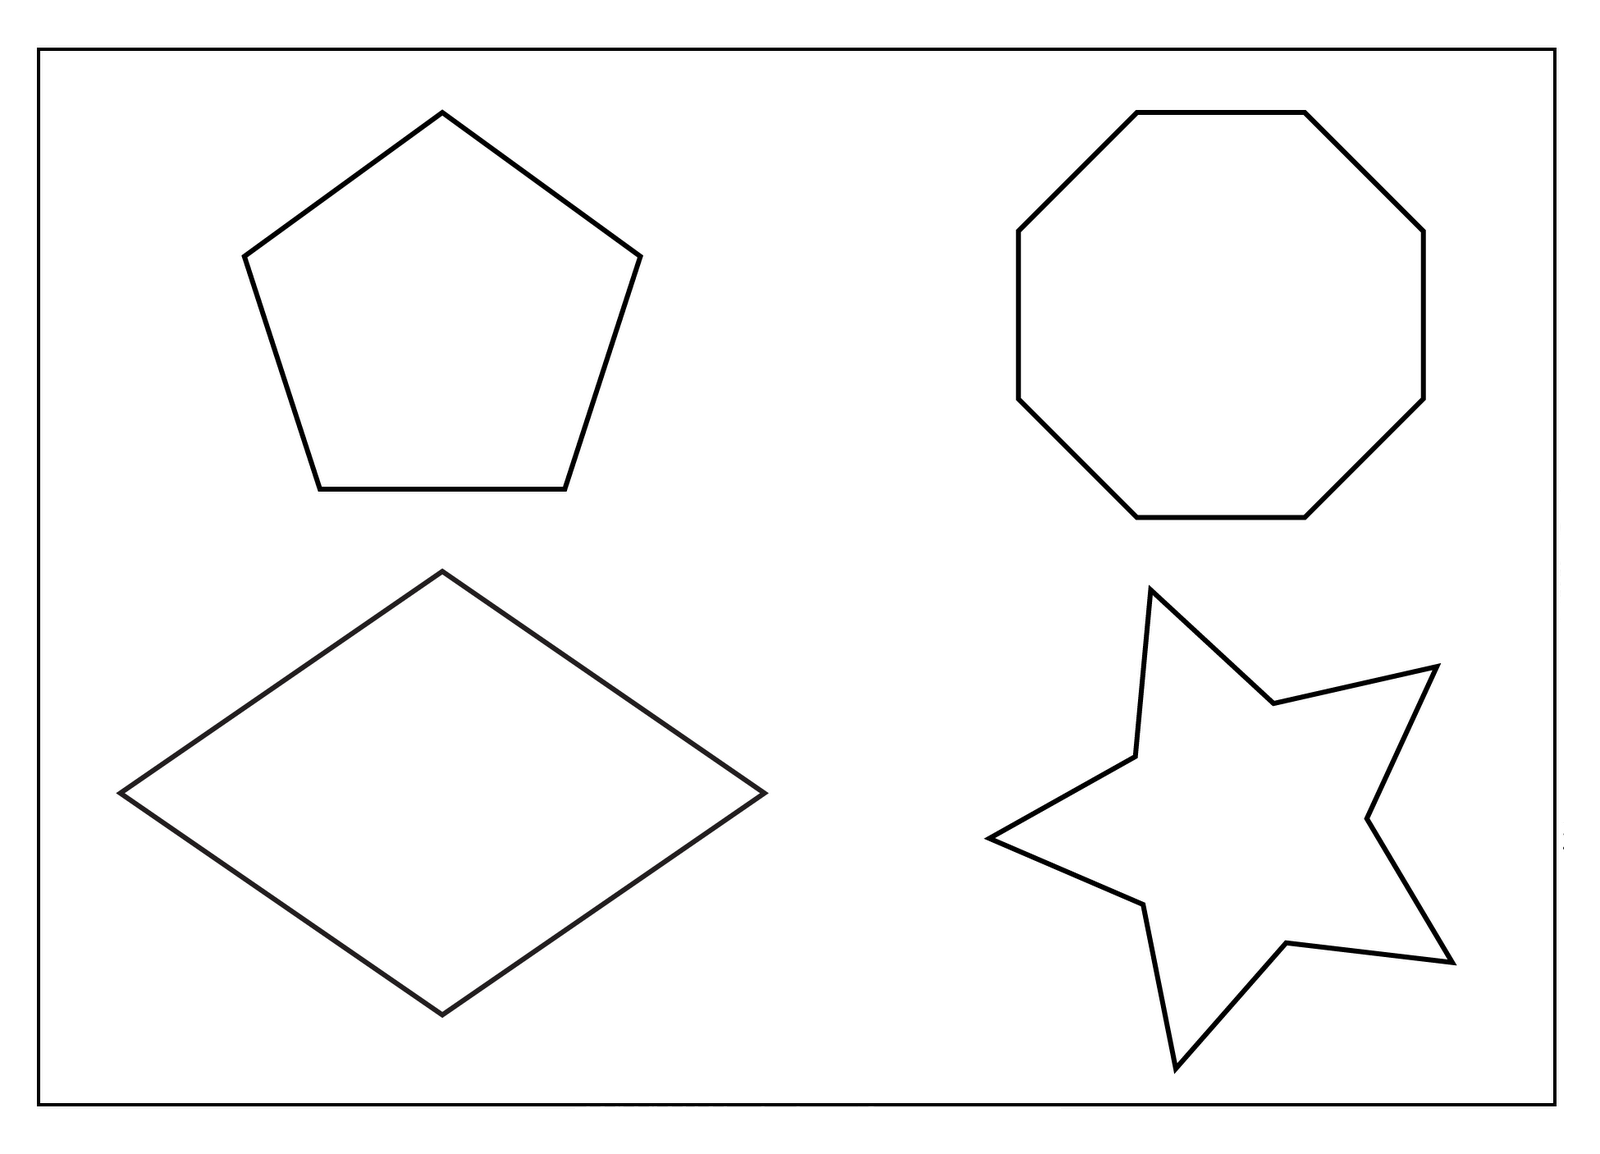 shapes for kids to cut out printable